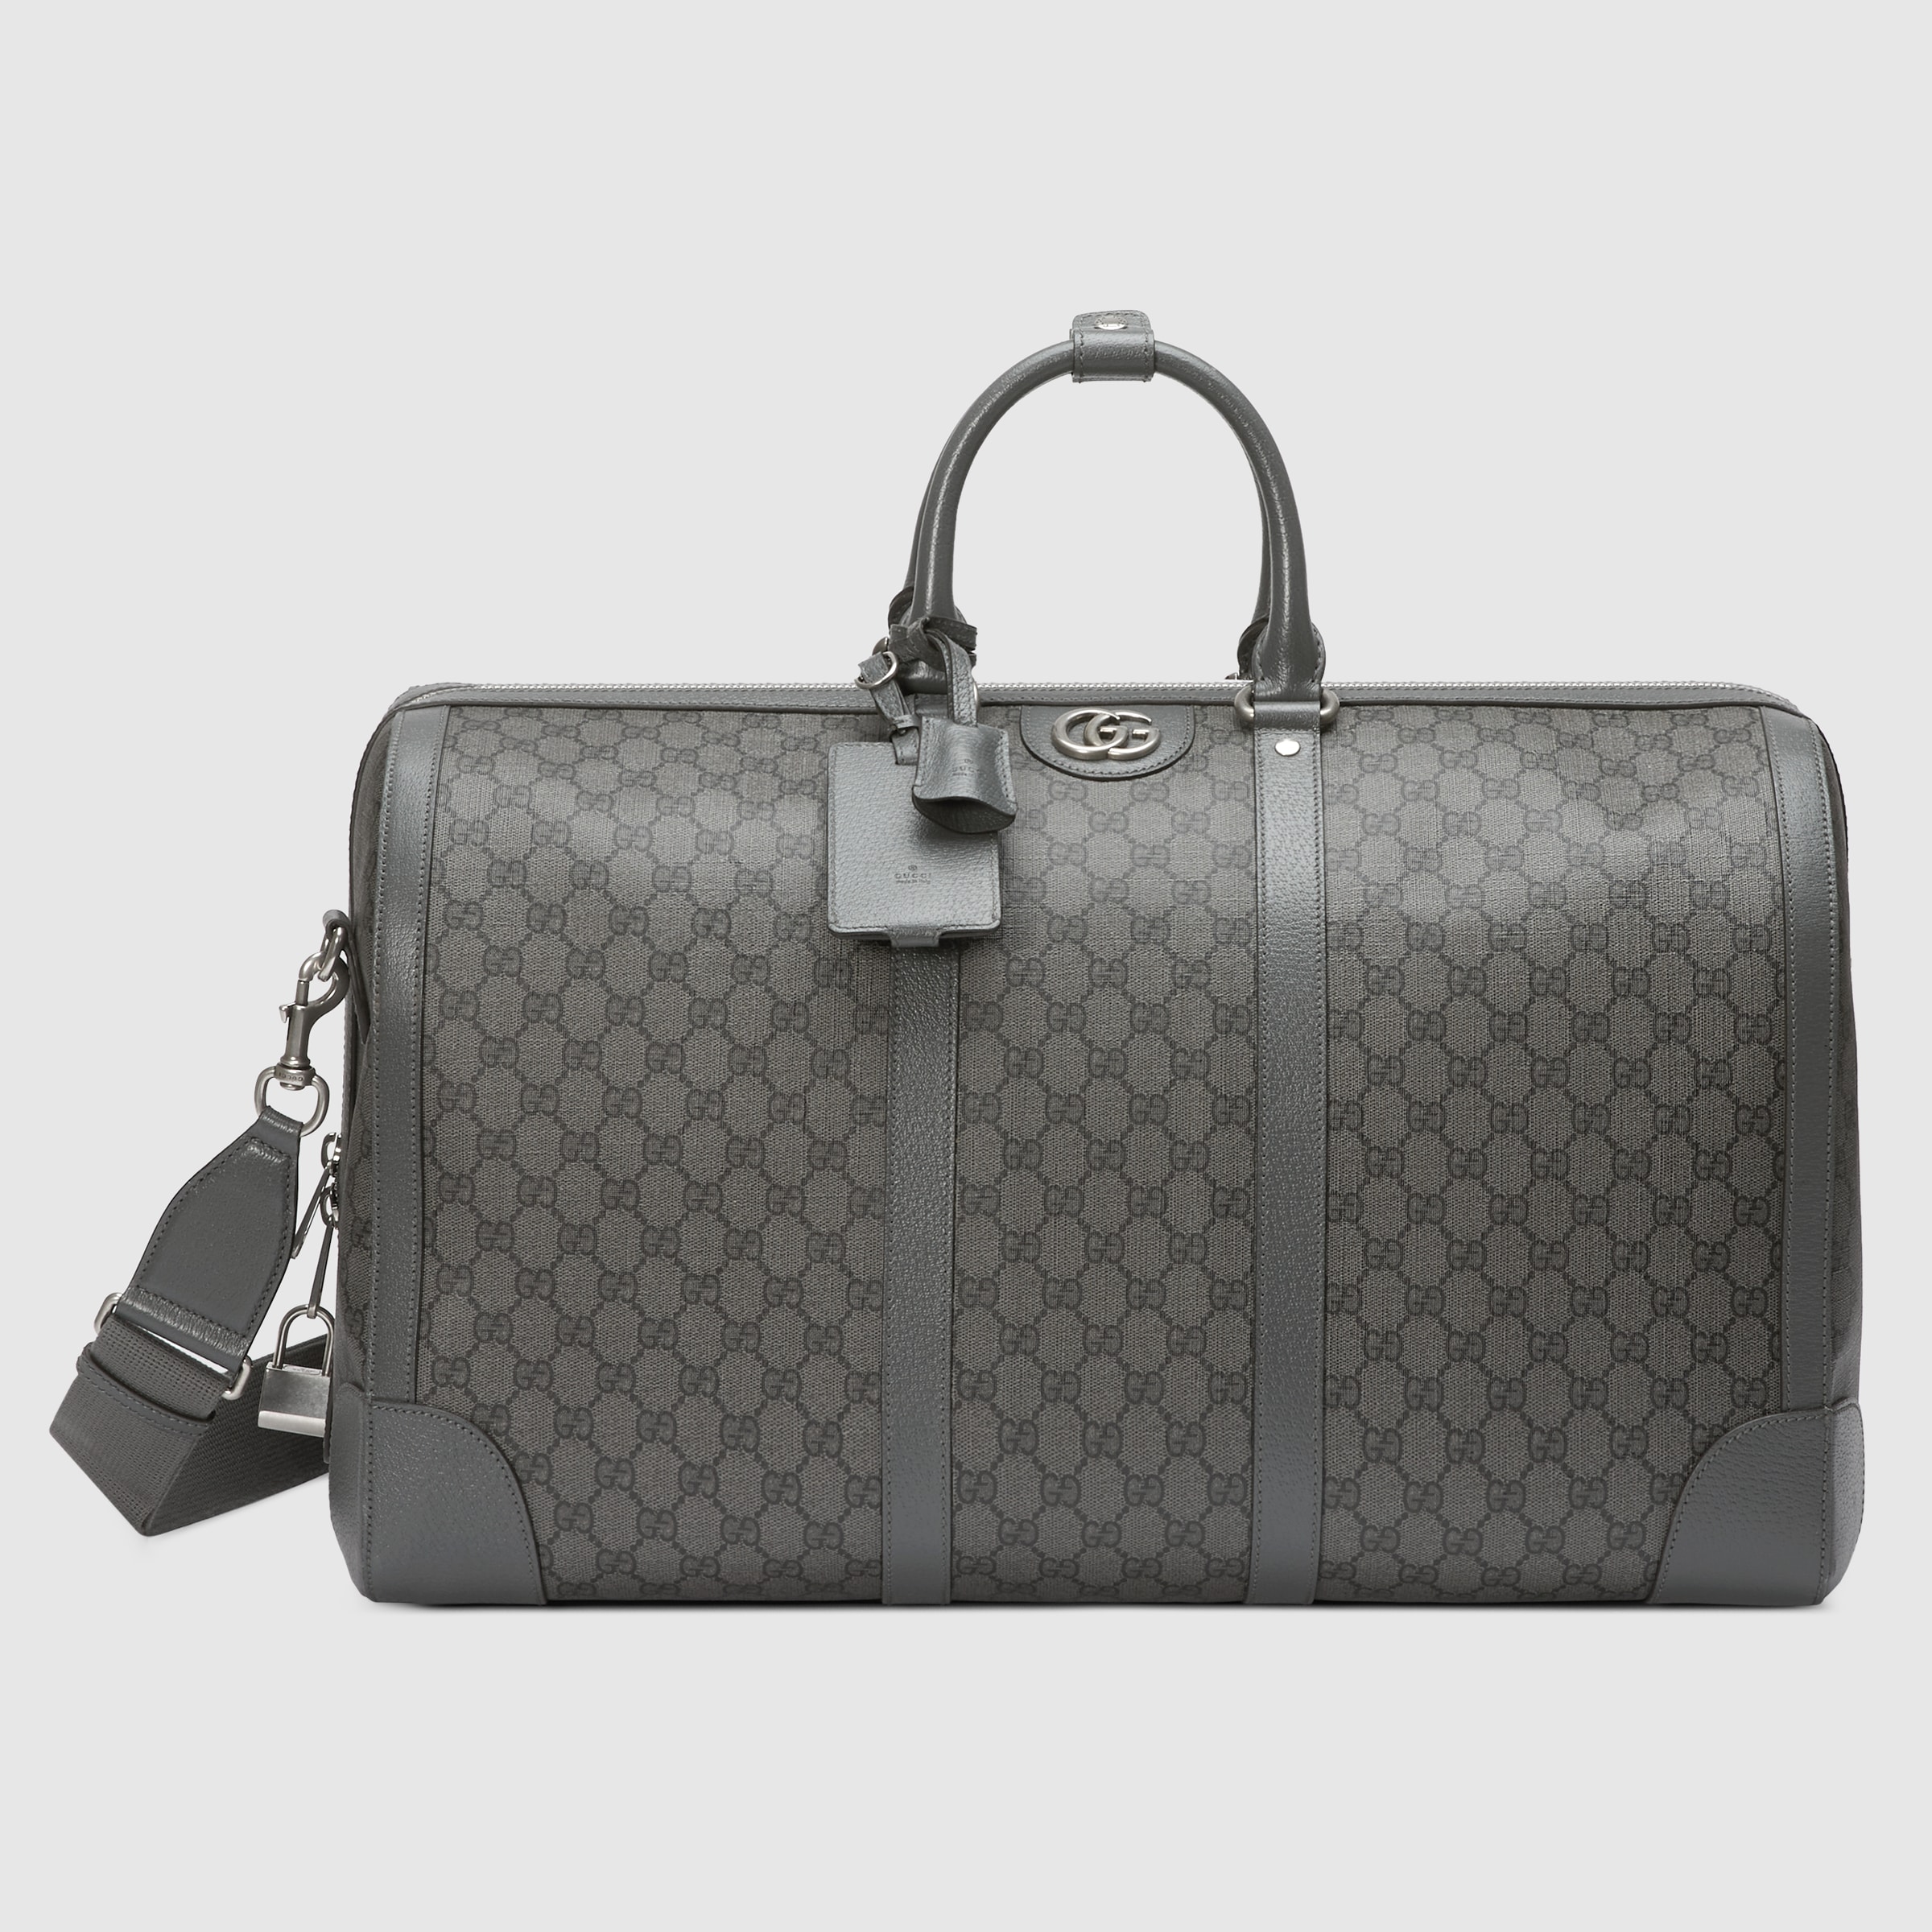 Gucci ophidia large duffle bag